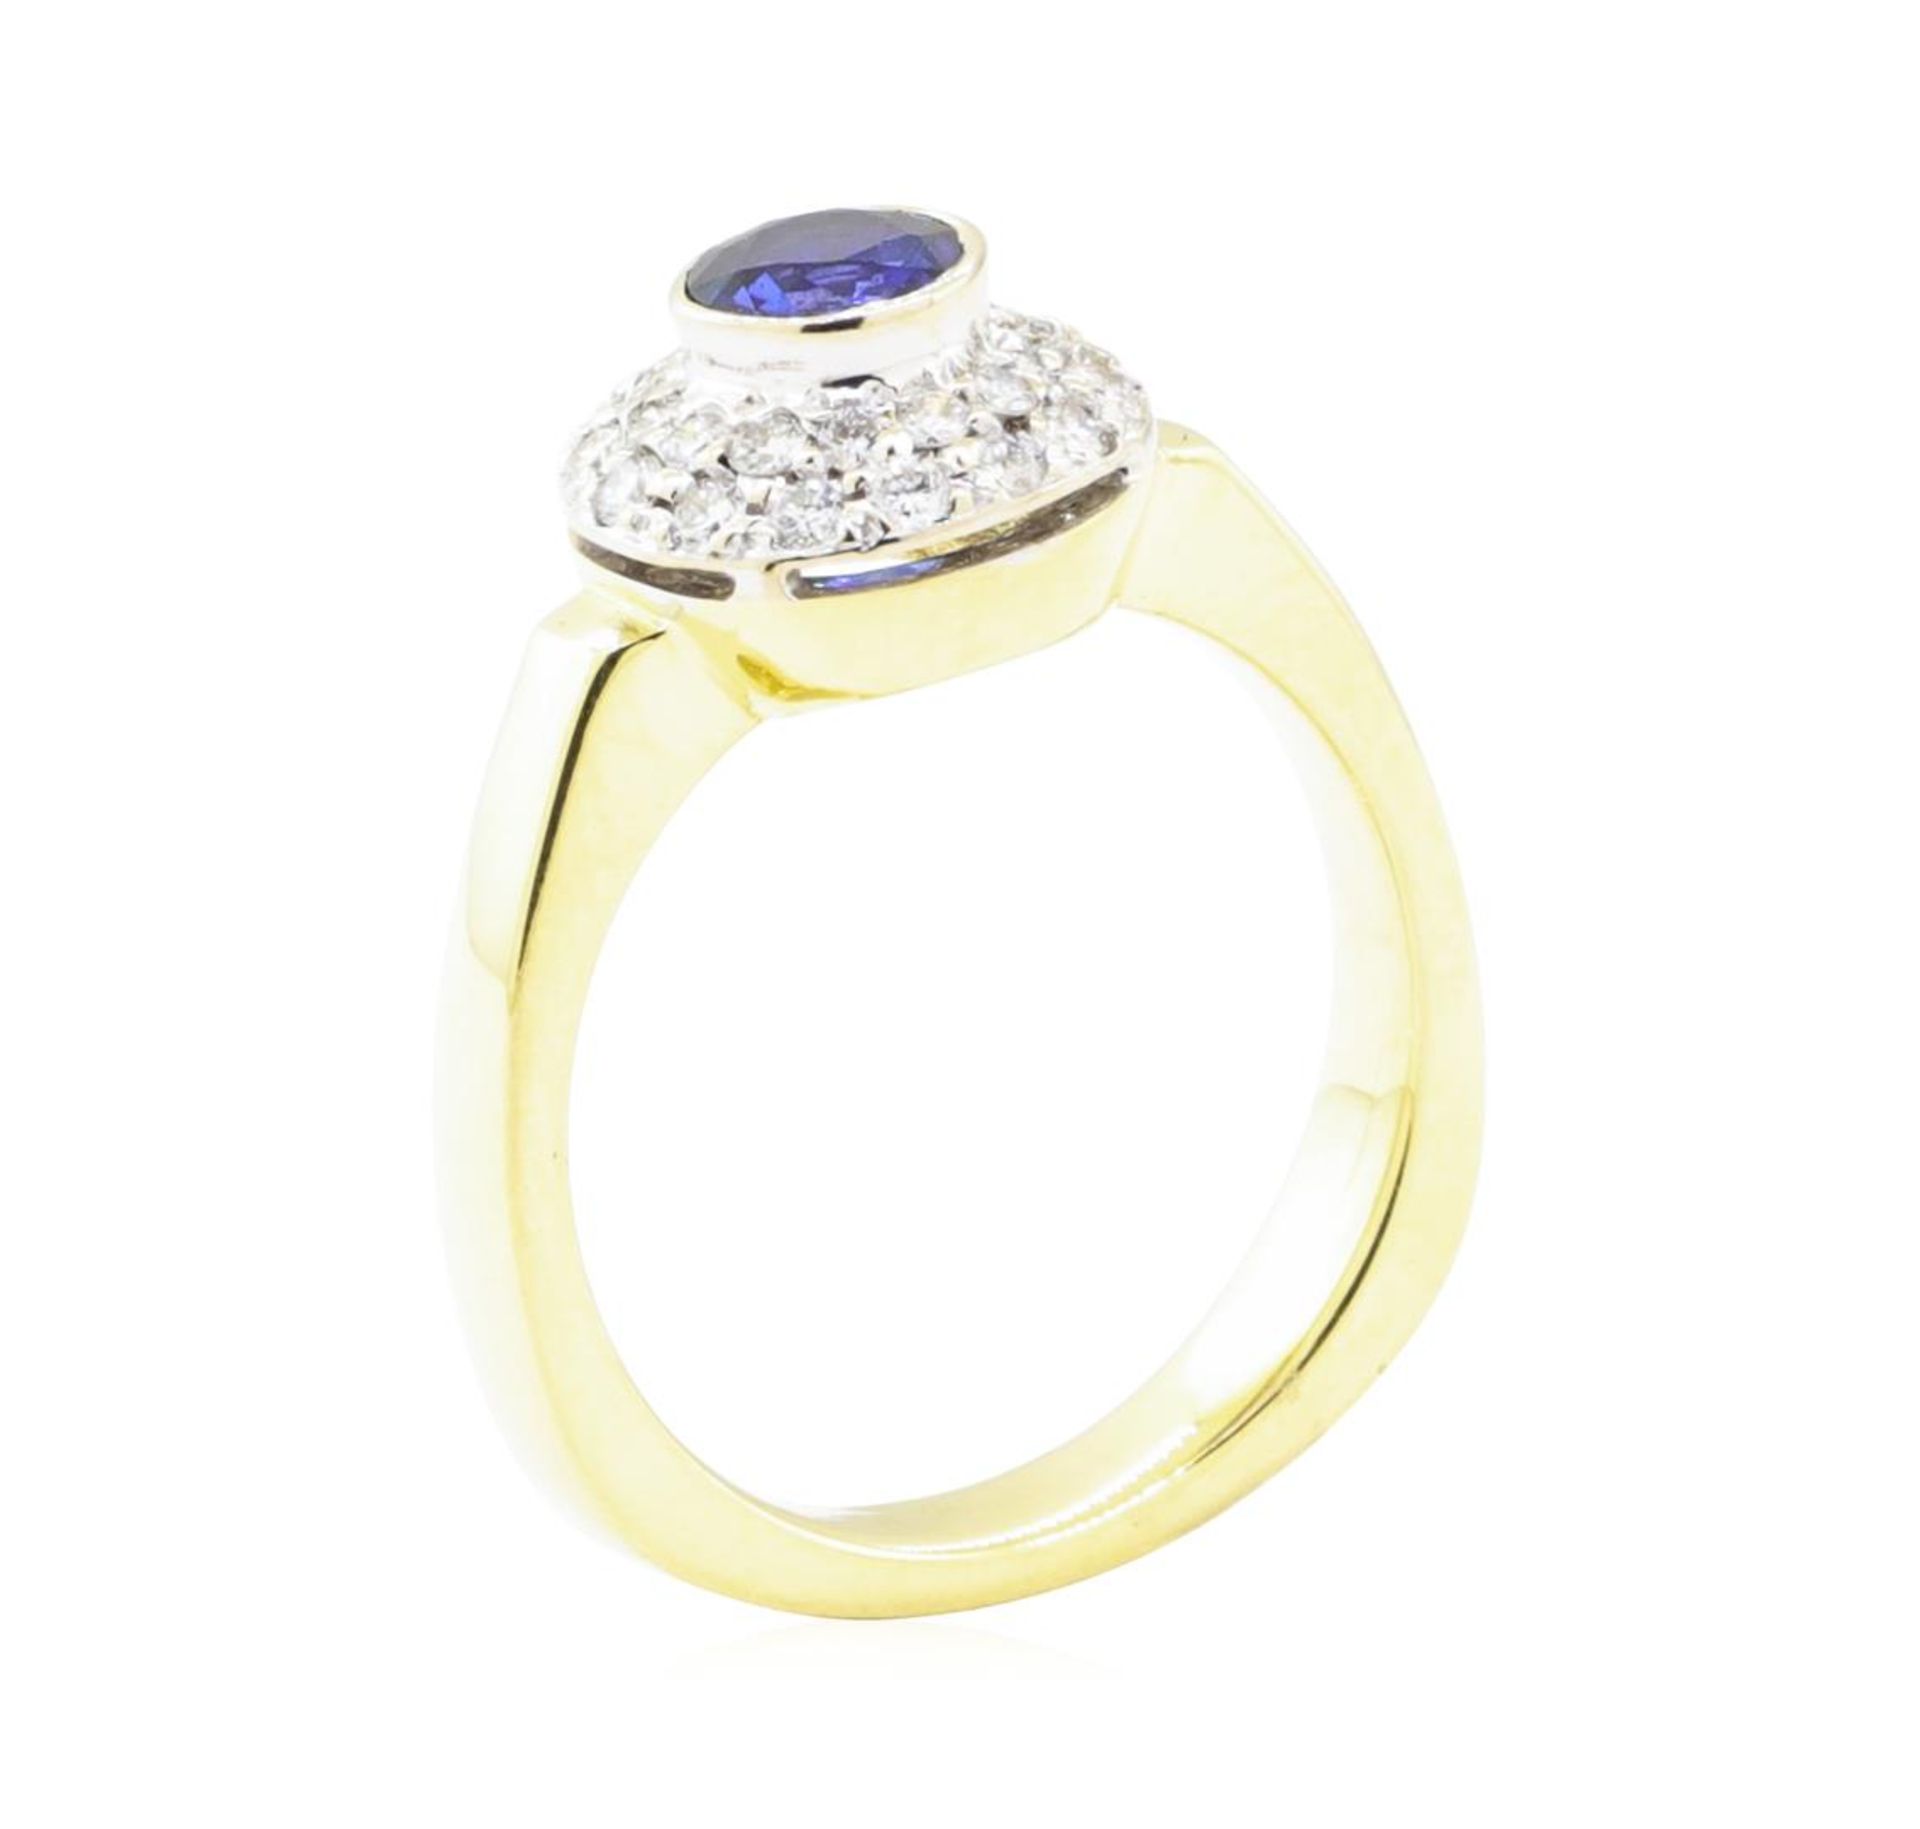 1.02 ctw Sapphire and Diamond Ring - 18KT Yellow Gold - Image 4 of 4